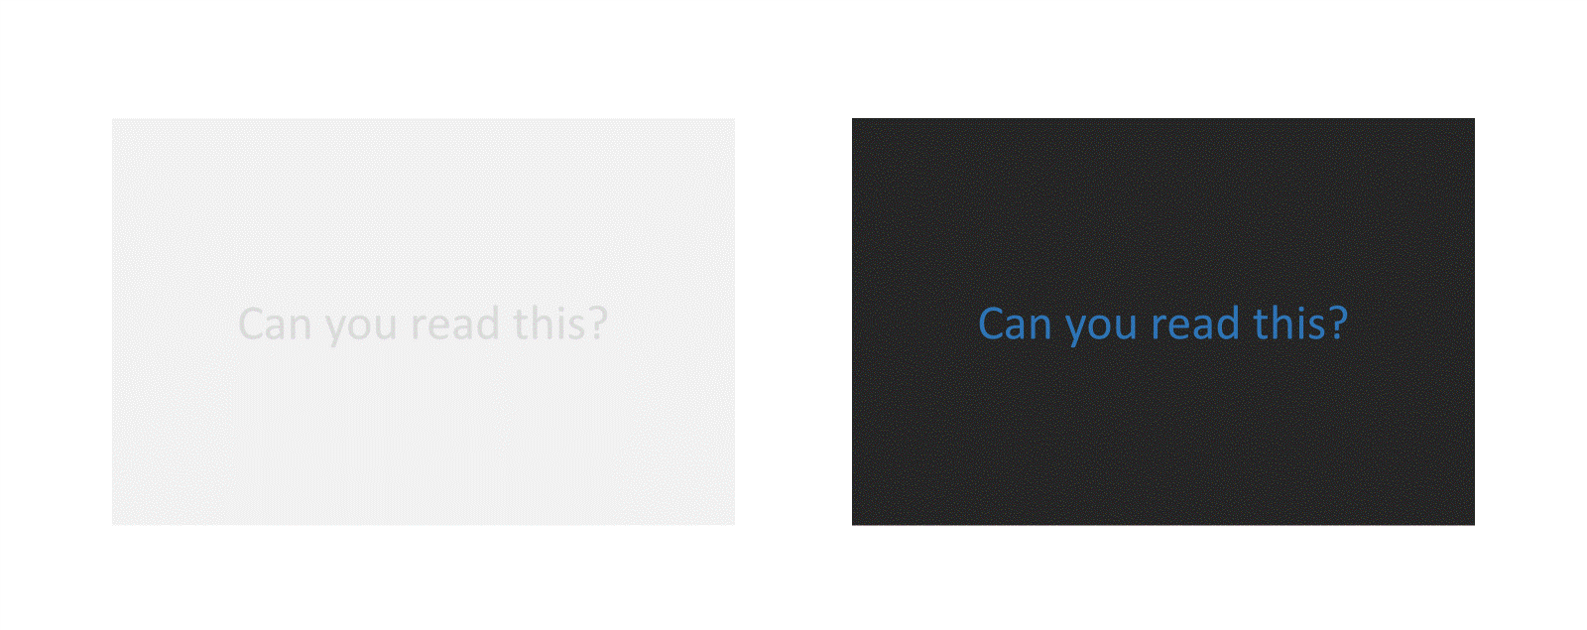 Two text boxes with text reading 'Can you read this?'. The first text box is pale grey with grey text, the second is dark grey with dark blue text. In both boxes the text is hard to read. 